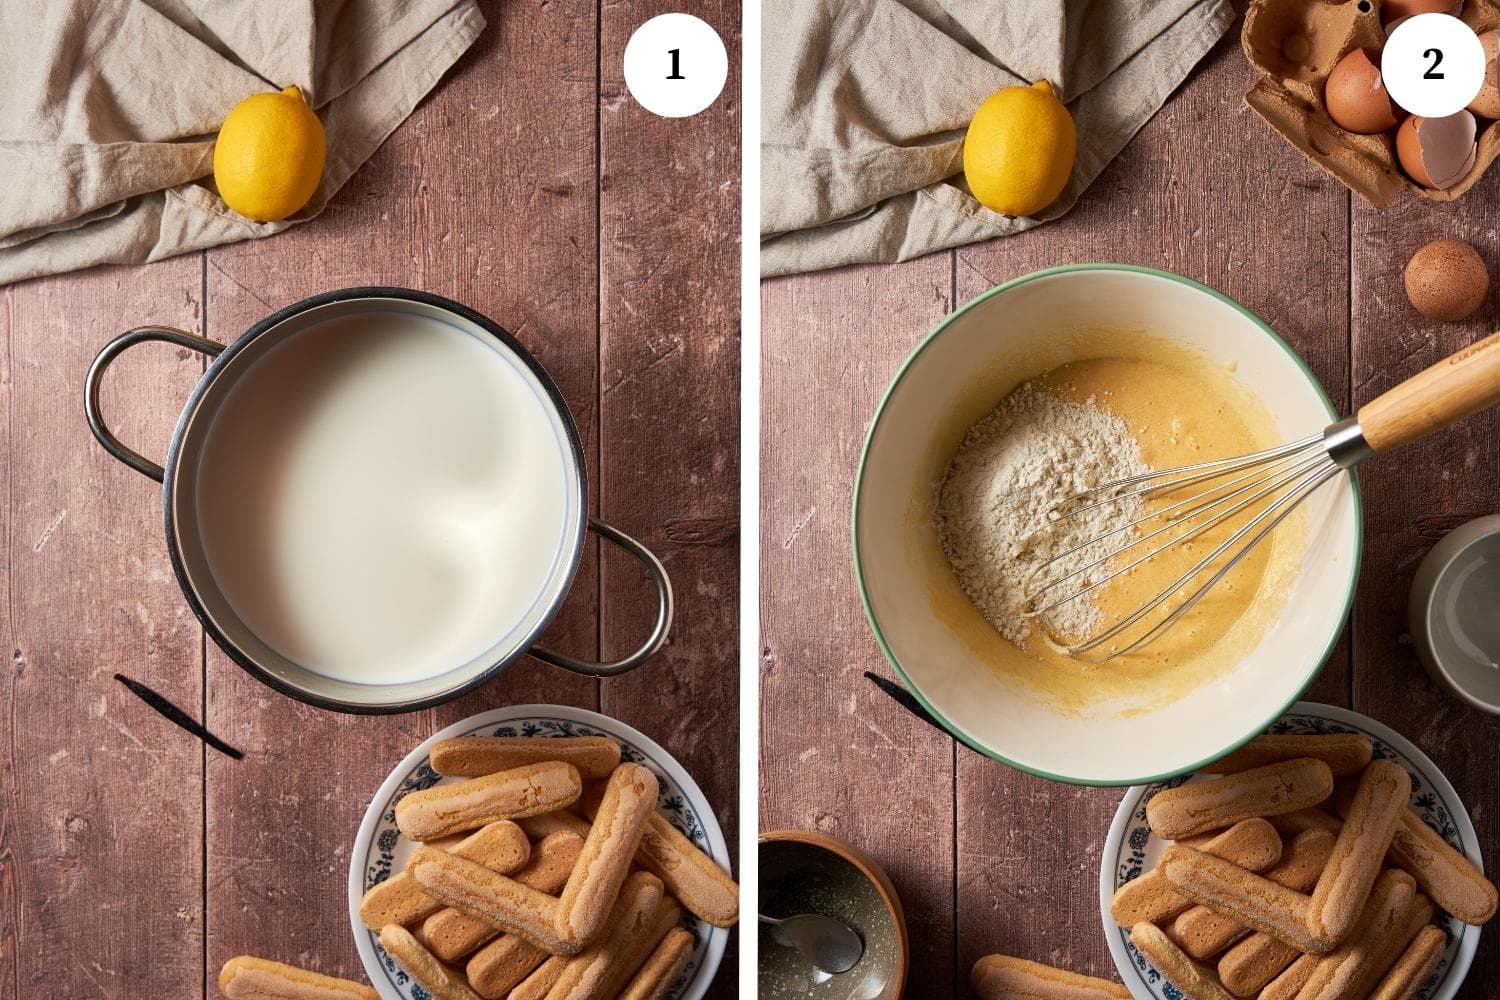 zuppa inglese preparation steps - bring the milk to boil,  mix the eggs and the flour together